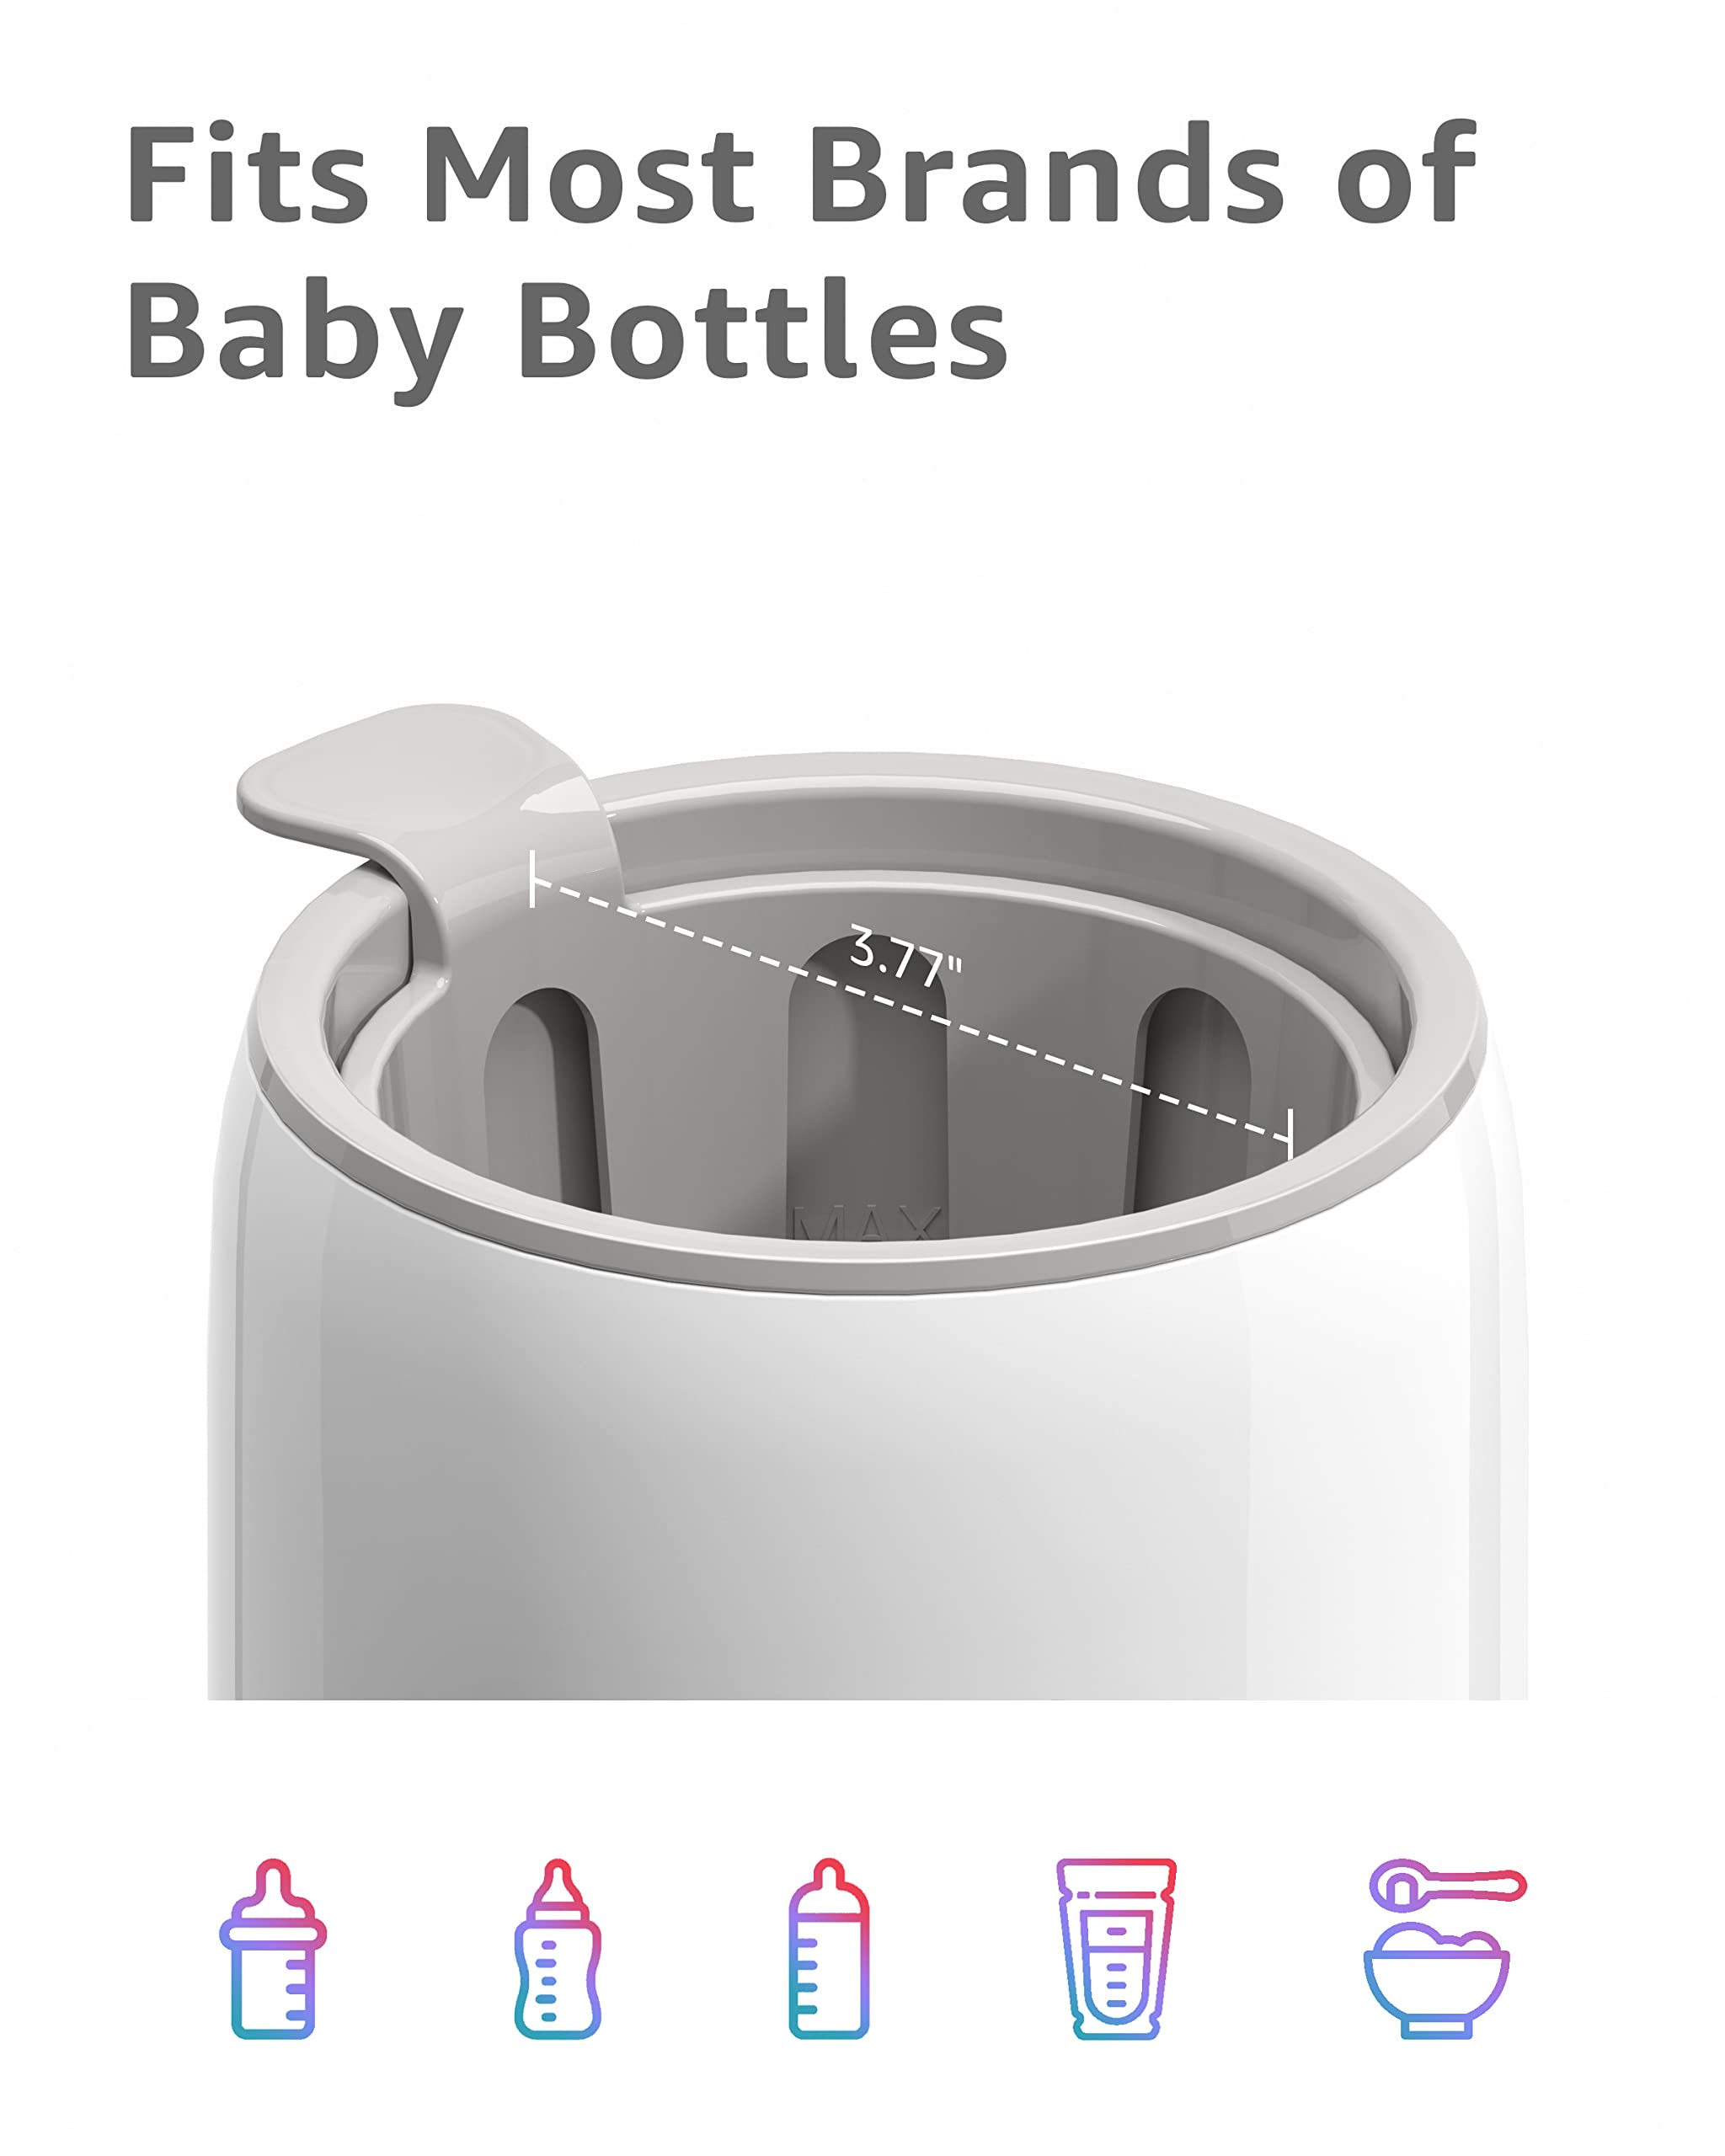 Bottle Warmer, GROWNSY 6-in-1 Fast Baby Milk Warmer for Breastmilk or Formula, Accurate Temperature Control, With Defrost, Sterili-zing, Keep, Heat Baby Food Jars Function